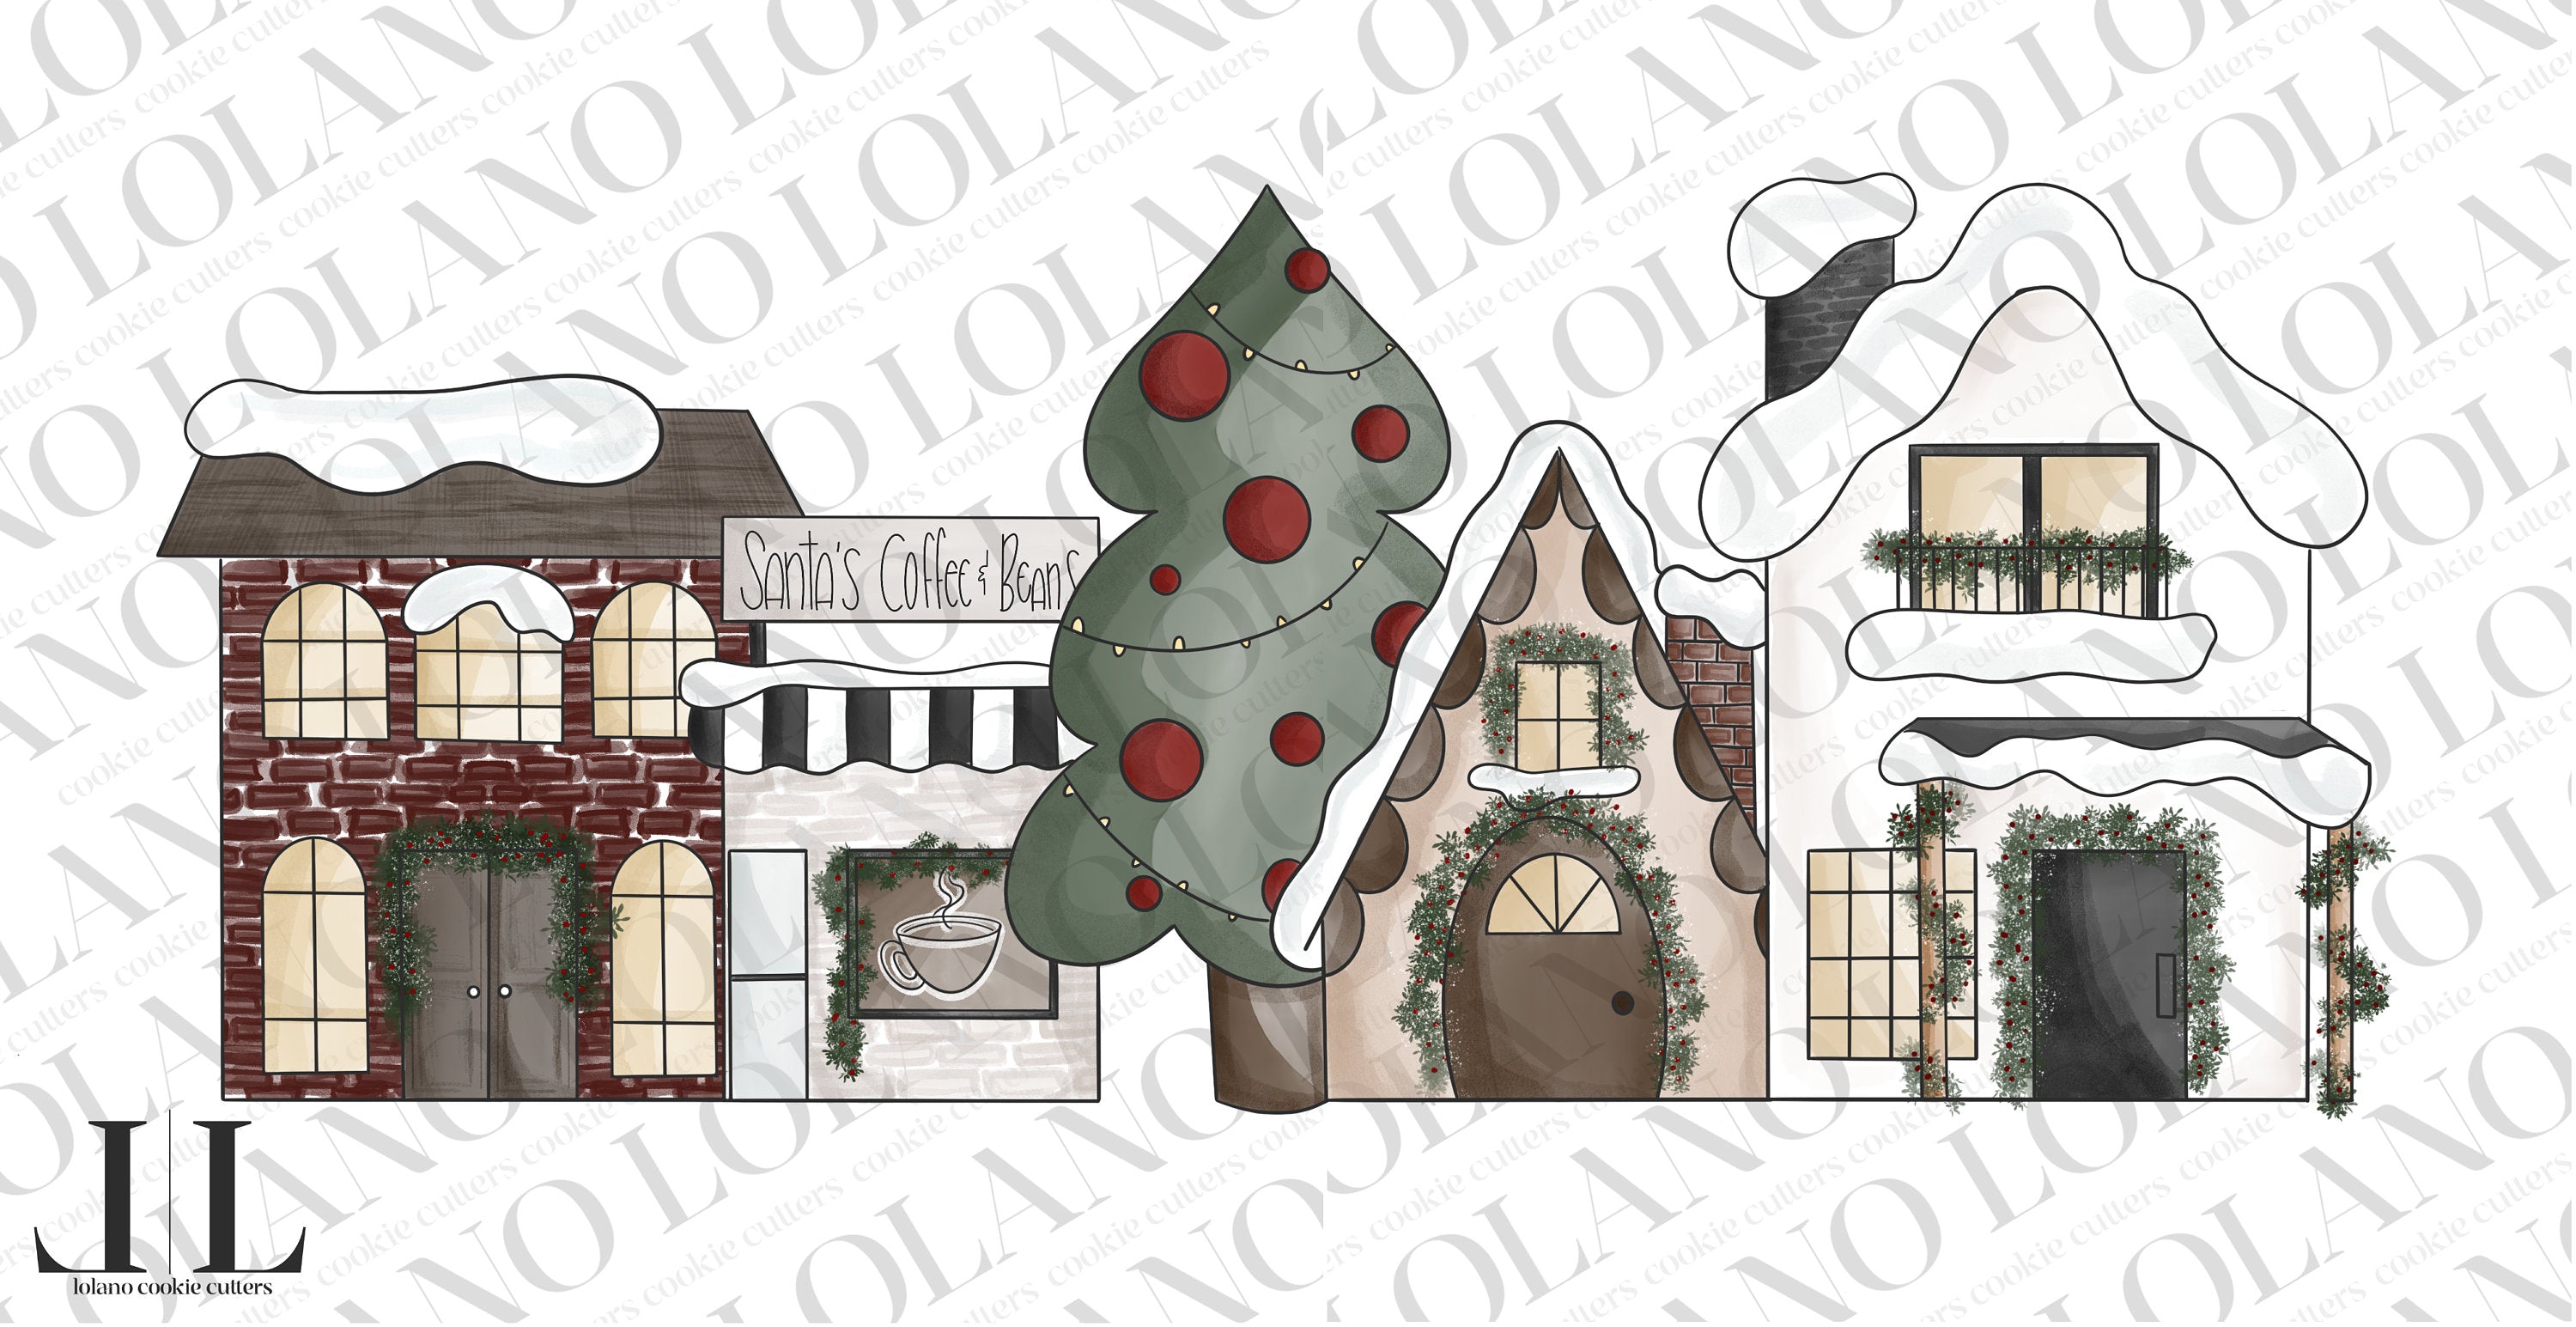 BYO Christmas village cookie cutter set of 5